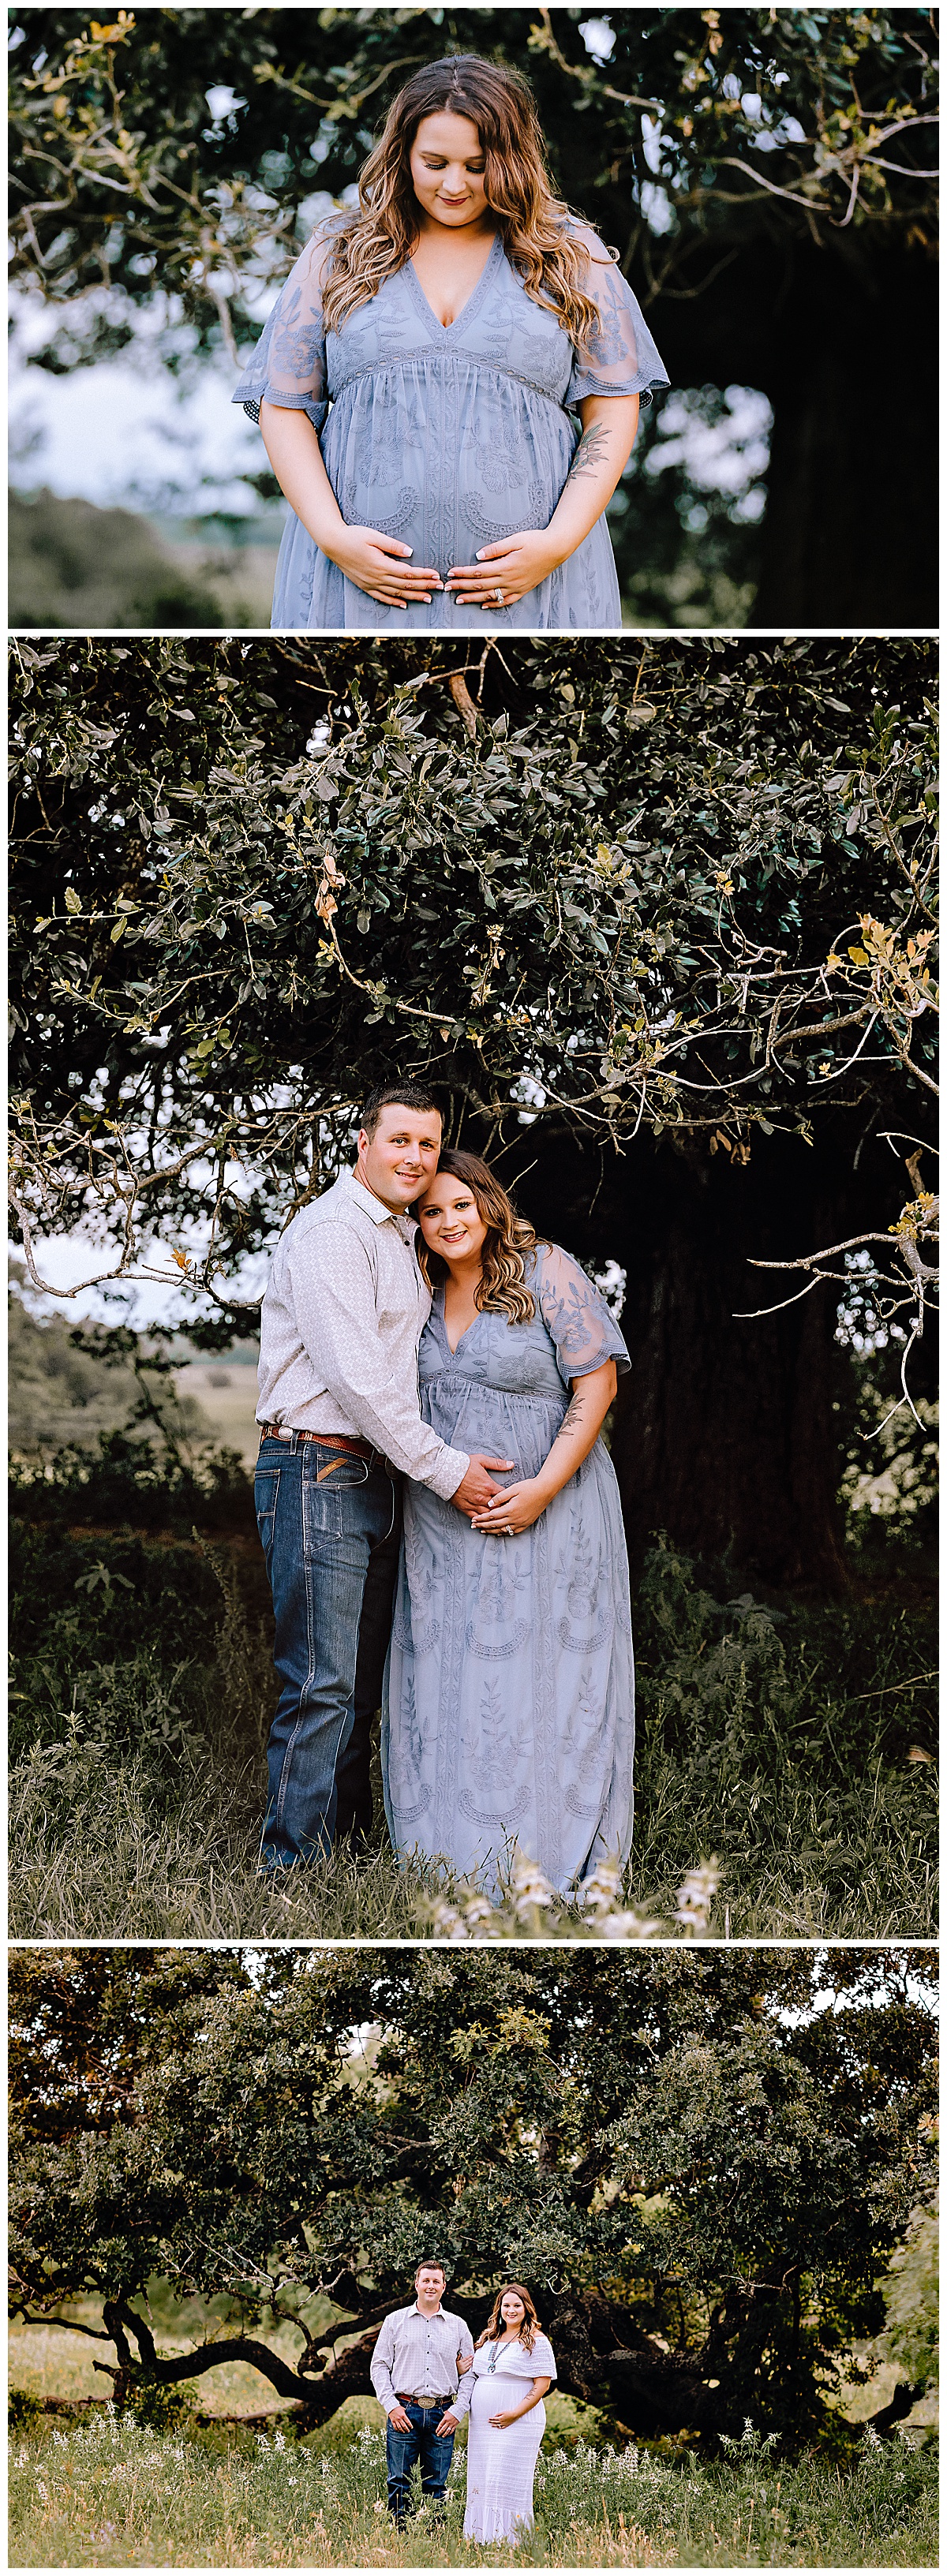 Rustic-Maternity-Session-Texas-Sunset-Carly-Barton-Photography_0073.jpg